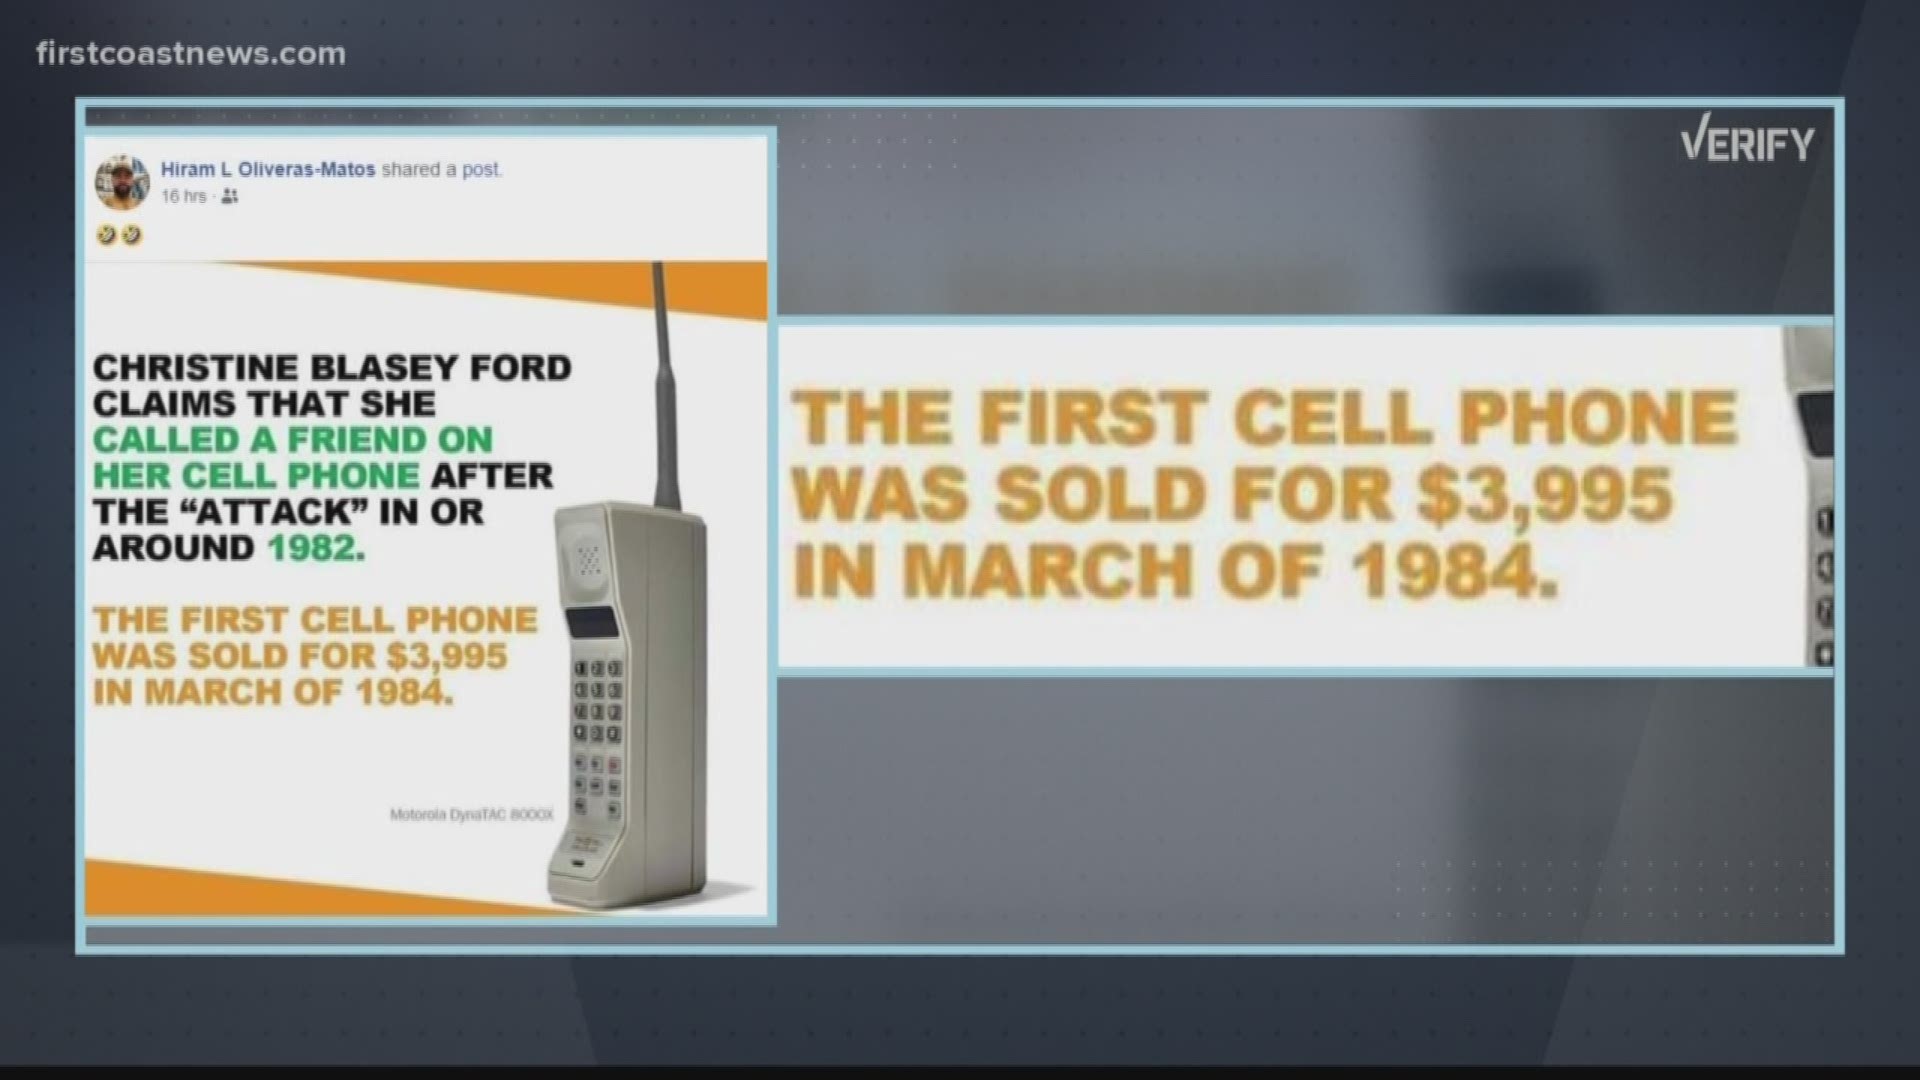 You may have seen a claim that Dr. Ford said she called a friend from her cell phone after her alleged sexual assault in 1982.